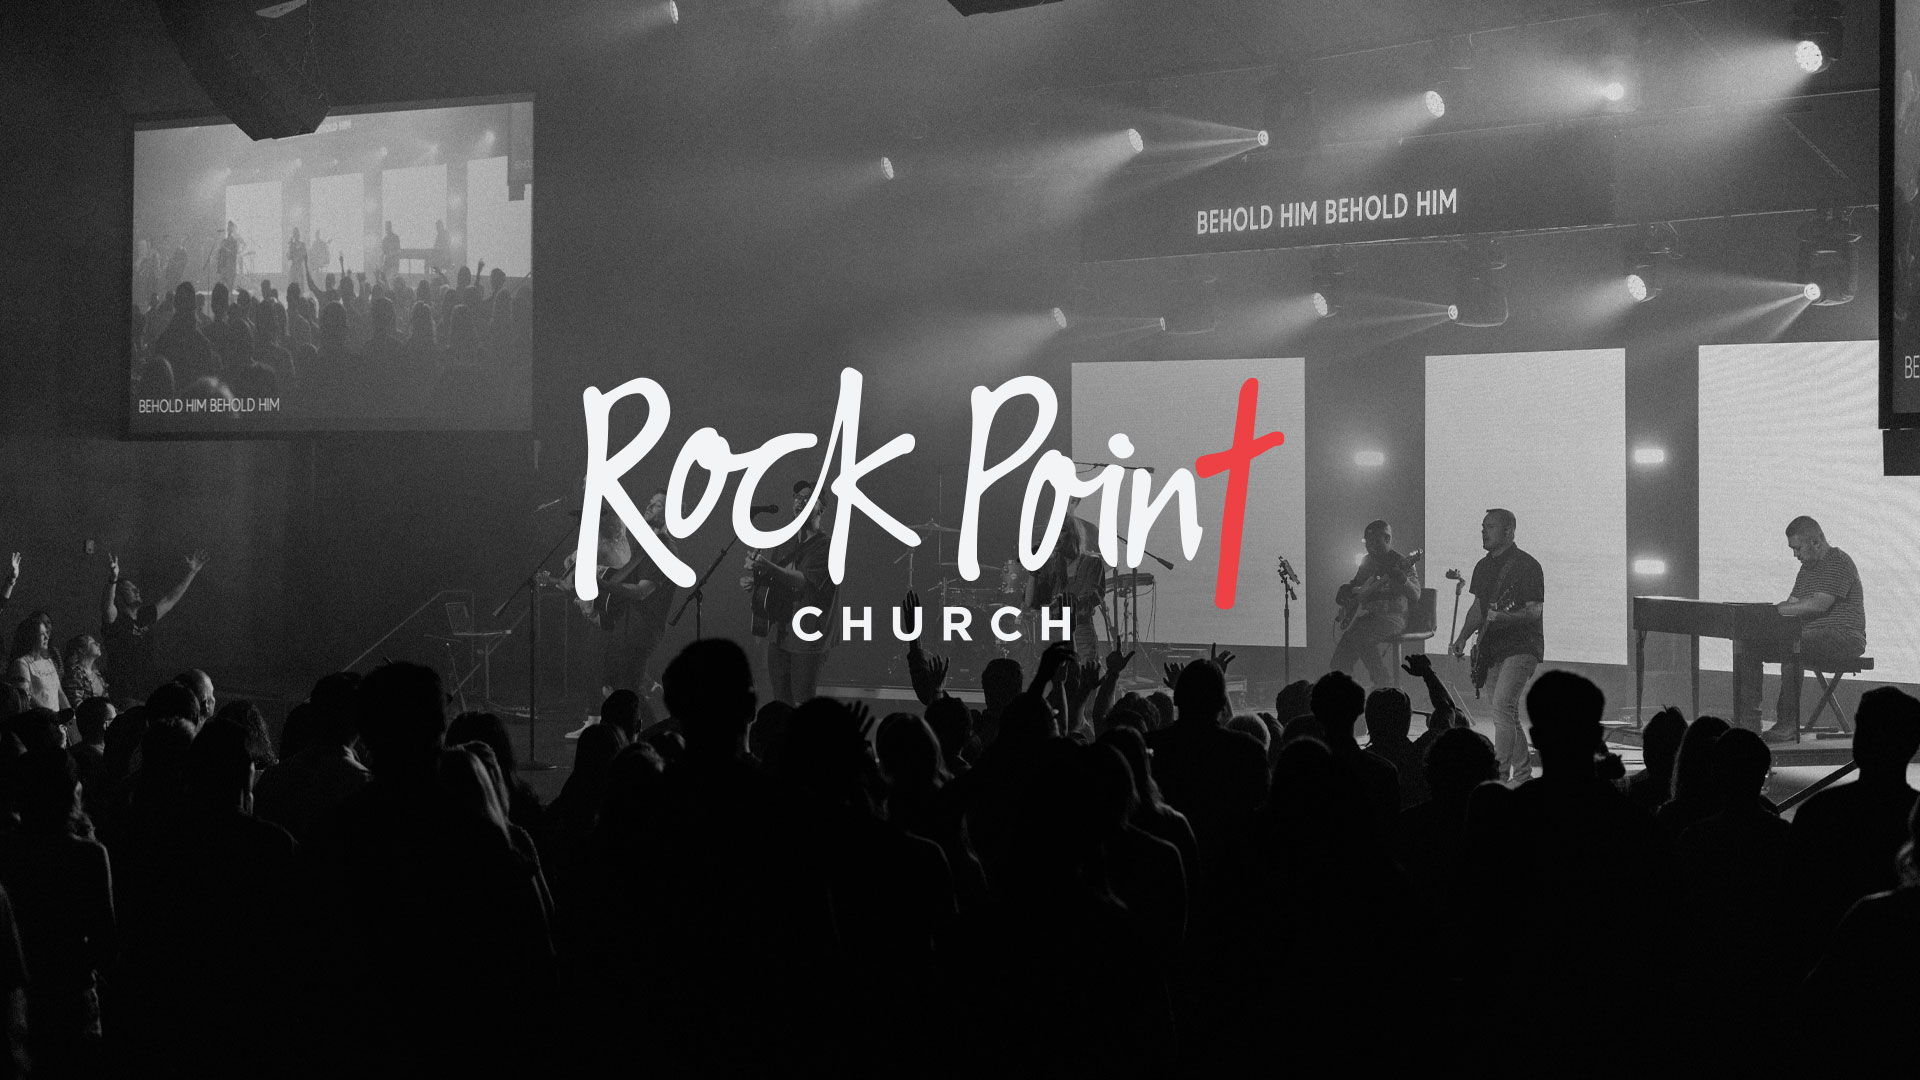 Welcome to the Rock Church 2021 